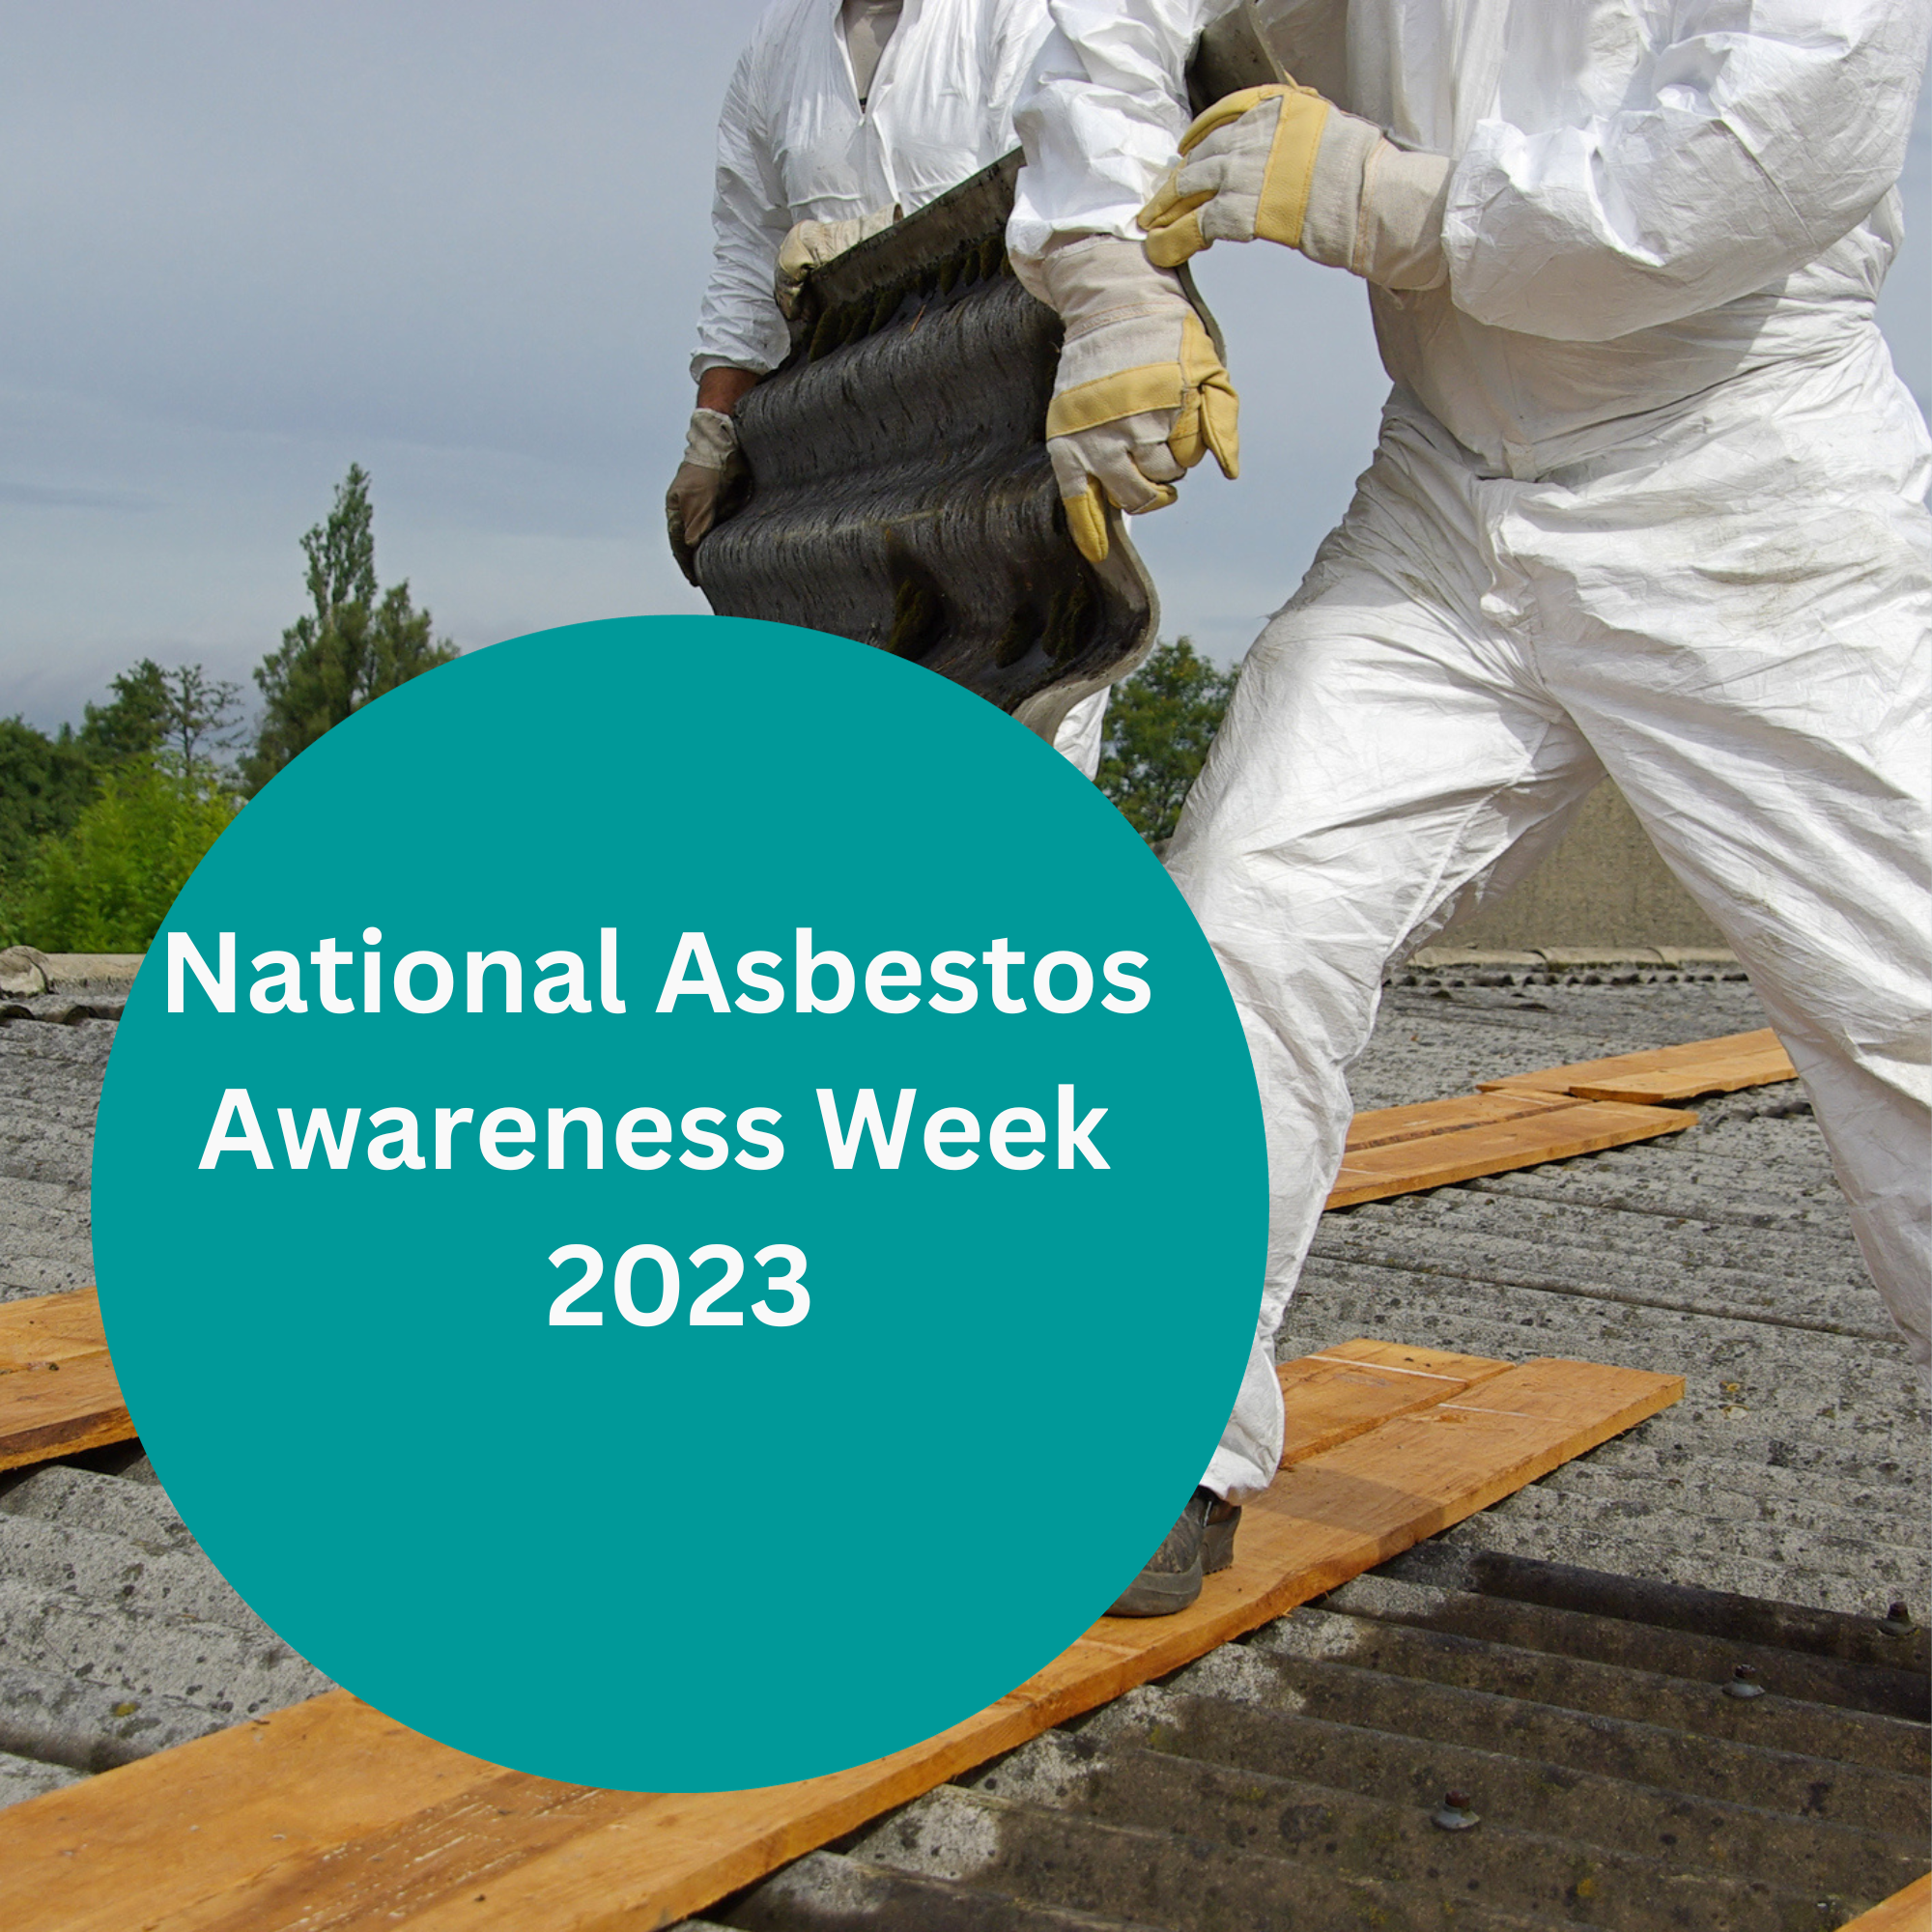 National Asbestos Awareness Week 2023 runs from the 20th to the 26th of November. It is a week where we raise awareness for the very real risks the Australian public still face with Asbestos and its related diseases. This National Asbestos Awareness Week marks the 20-year anniversary since Asbestos was completely banned in Australia. Throughout this week, we will reflect on the progress that has occurred since the ban, but also highlight the threats asbestos can still pose to us today.